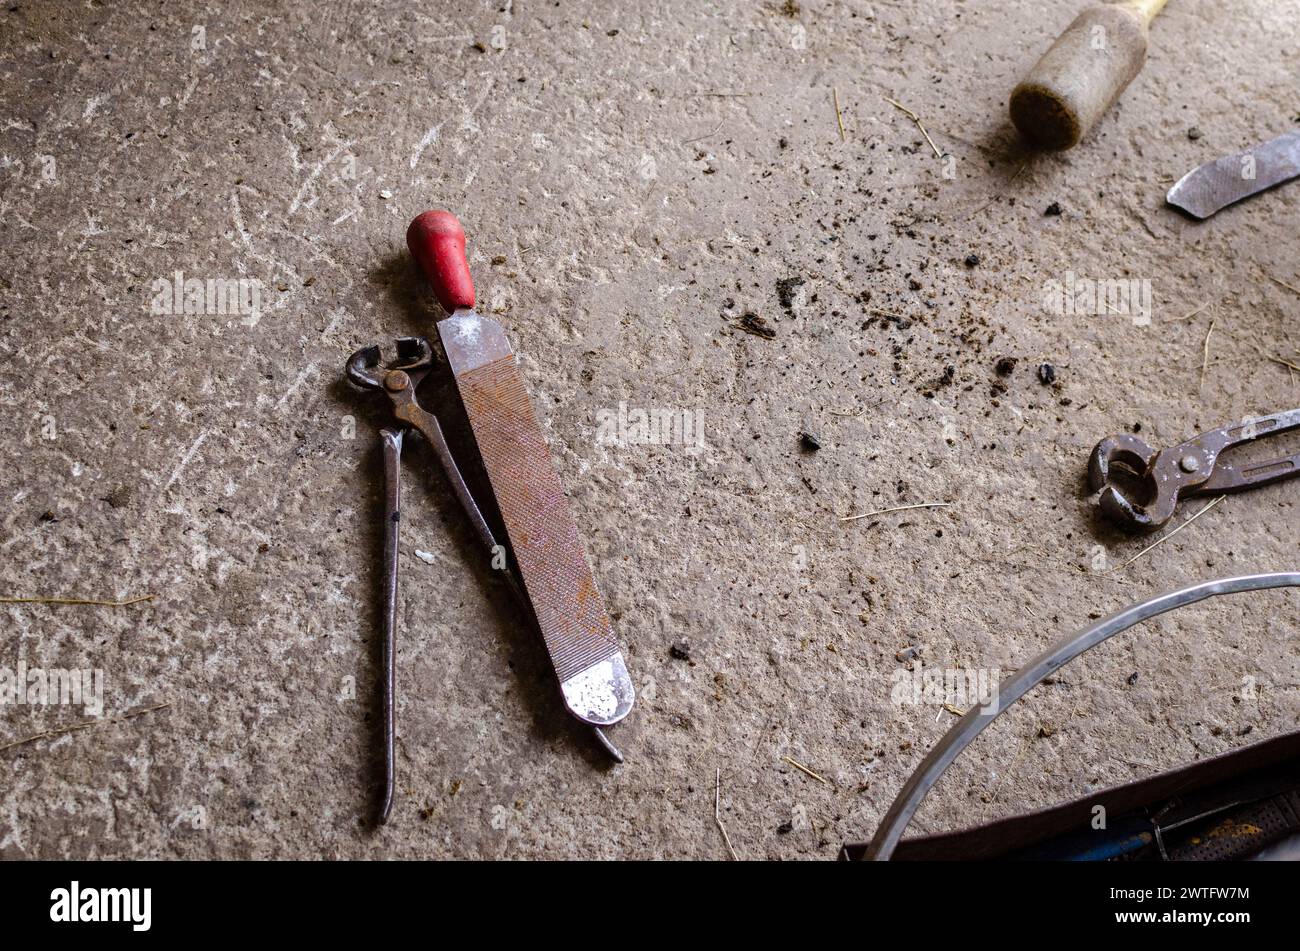 the blacksmith's anvil and tools, iron work, horseshoes, file pliers, hand tools Stock Photo